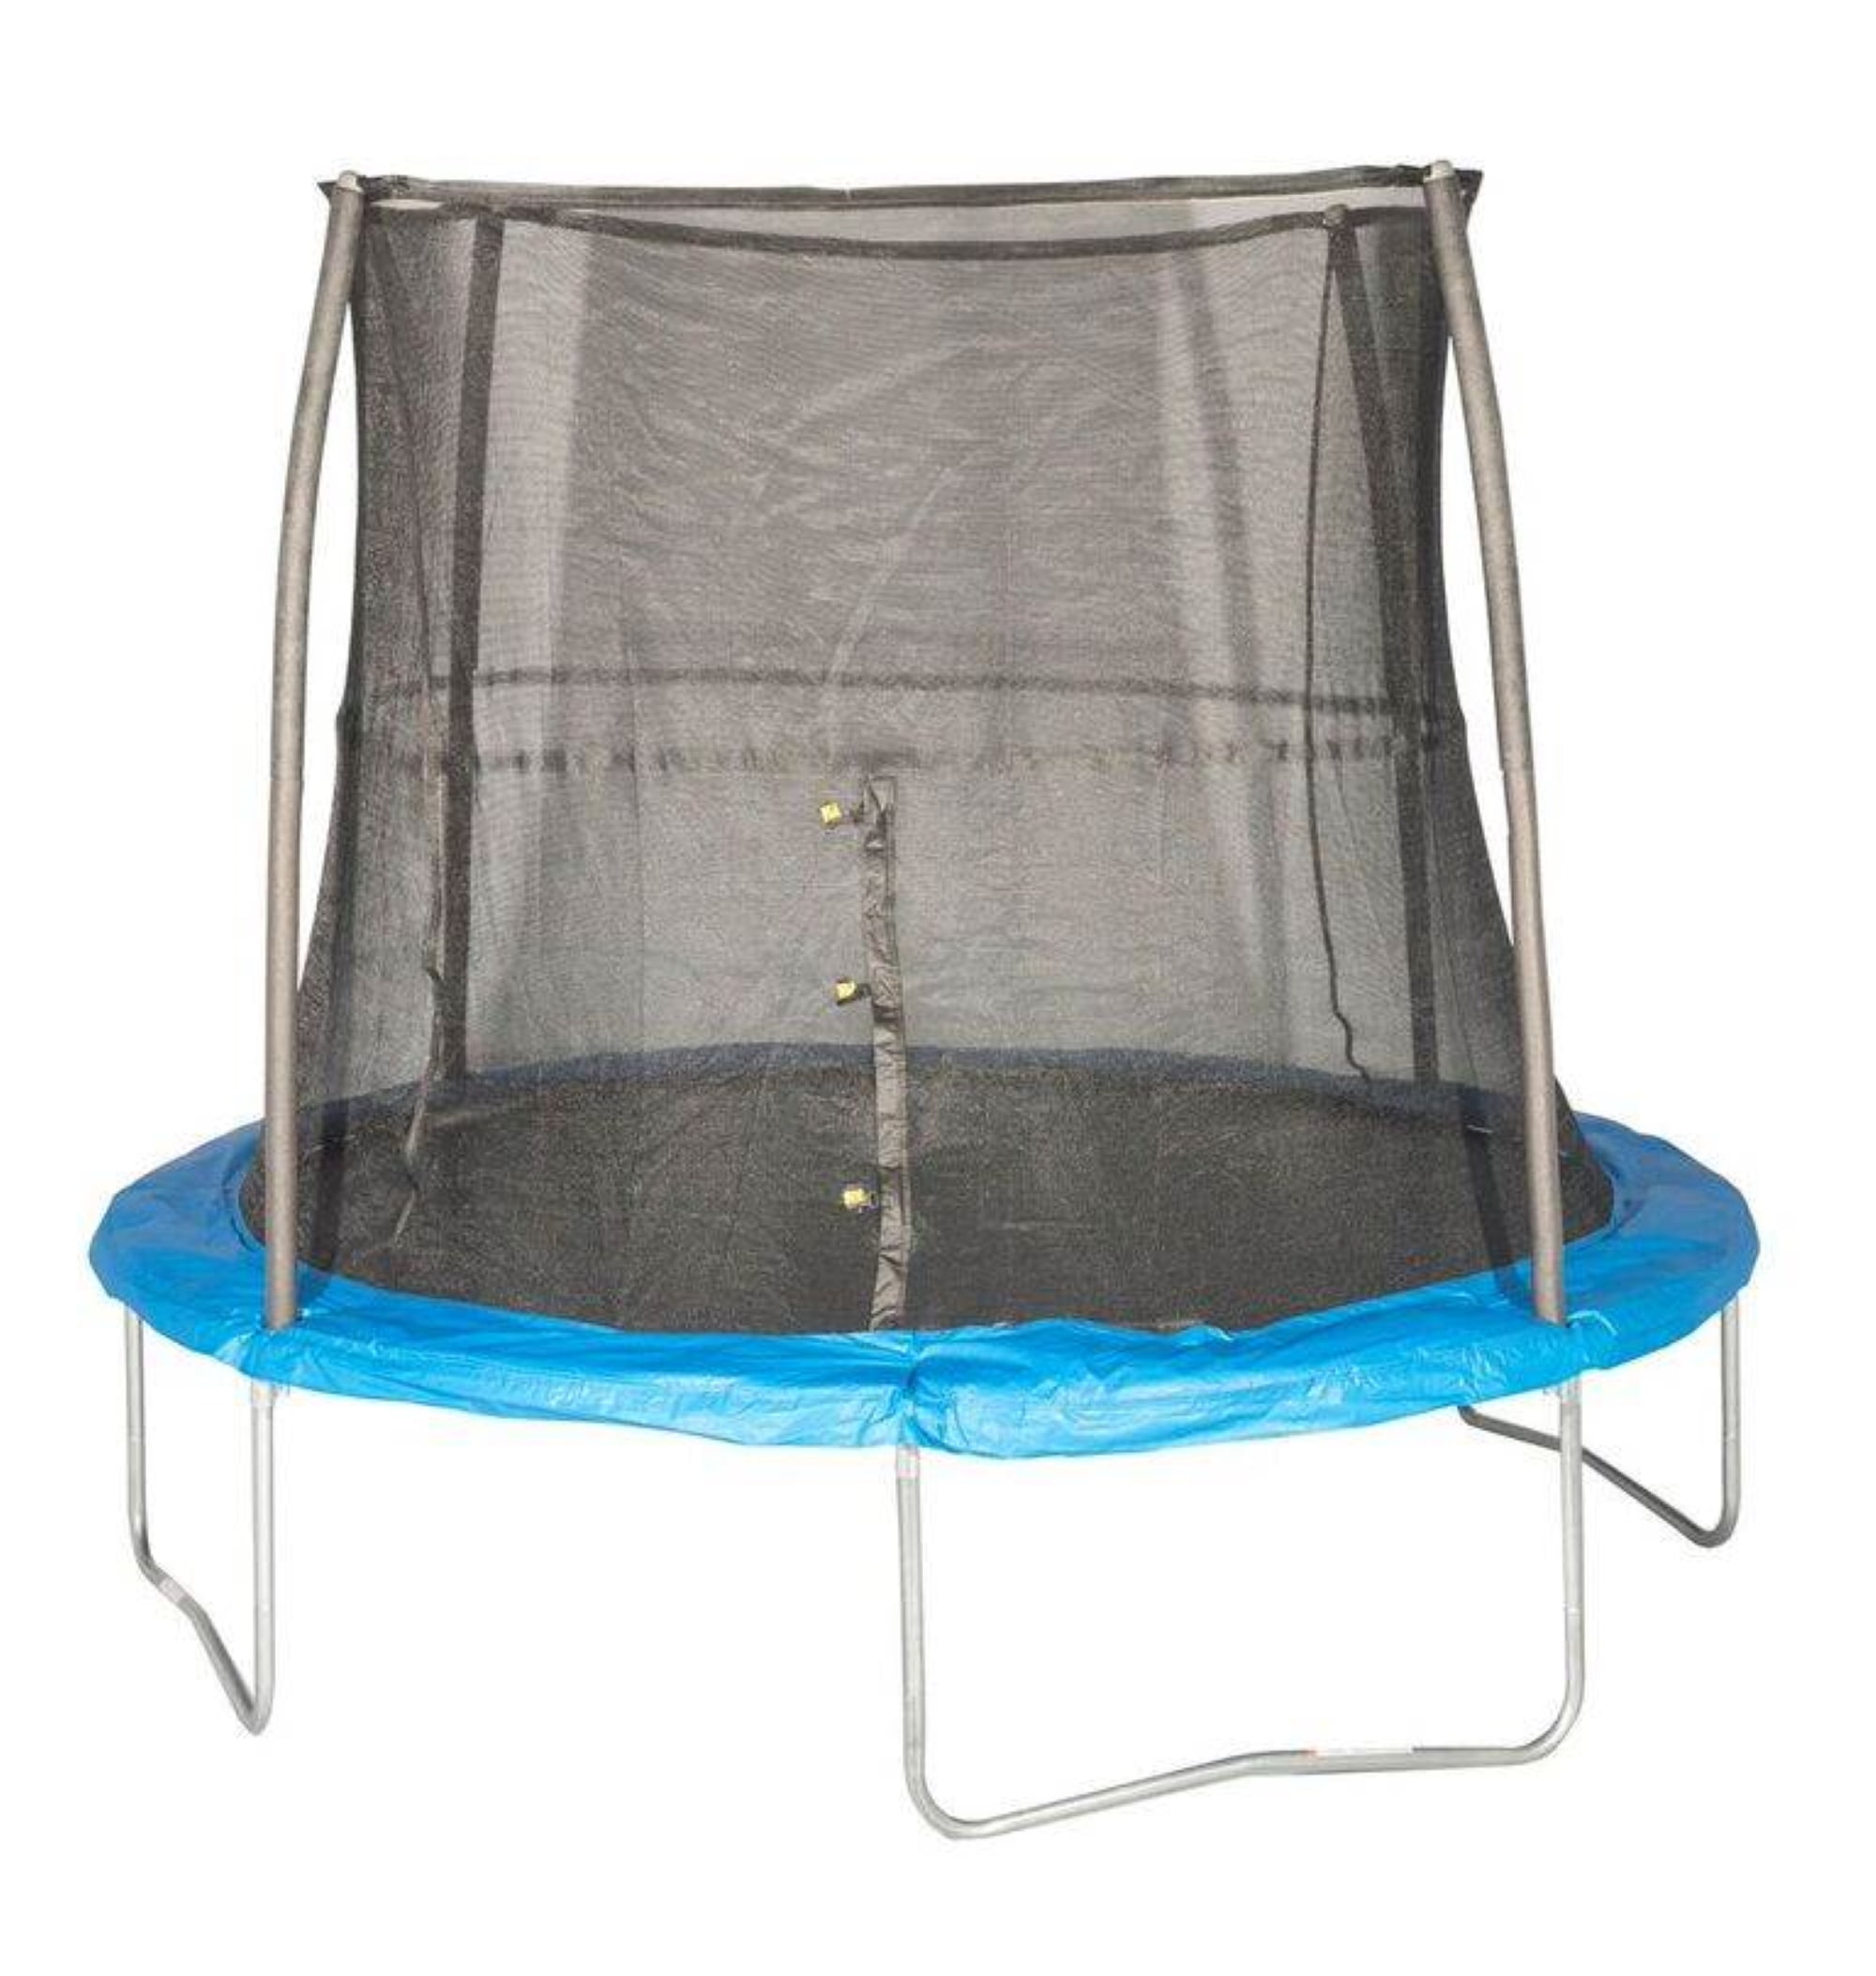 Jovego 10Ft Outdoor Trampoline for Kids with Safety Enclosure Net Bounce Jumping 